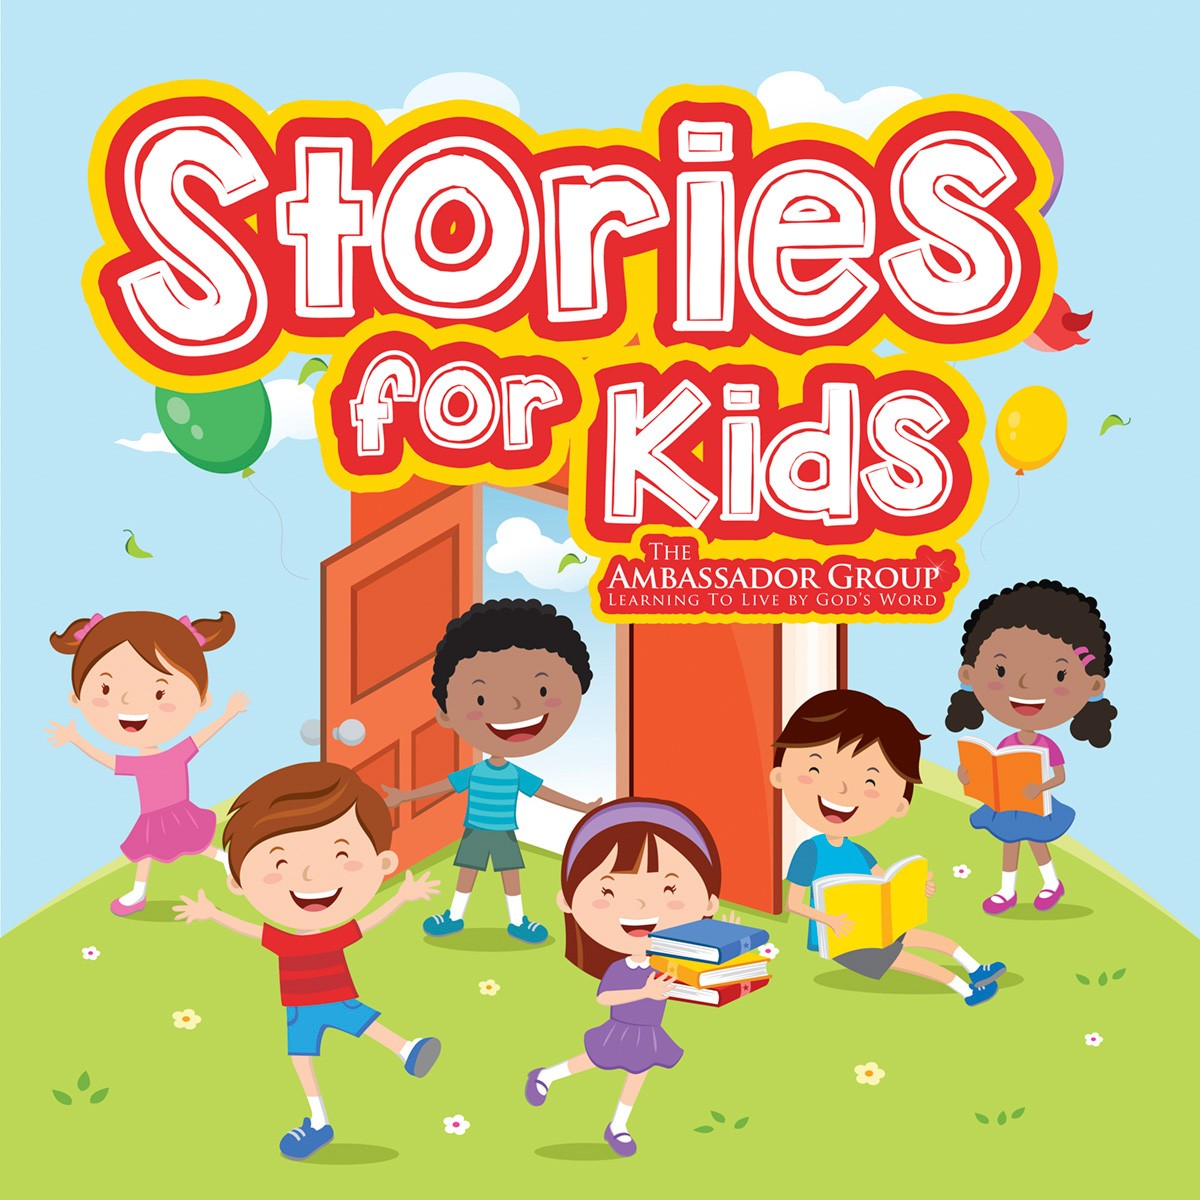 Stories for Kids